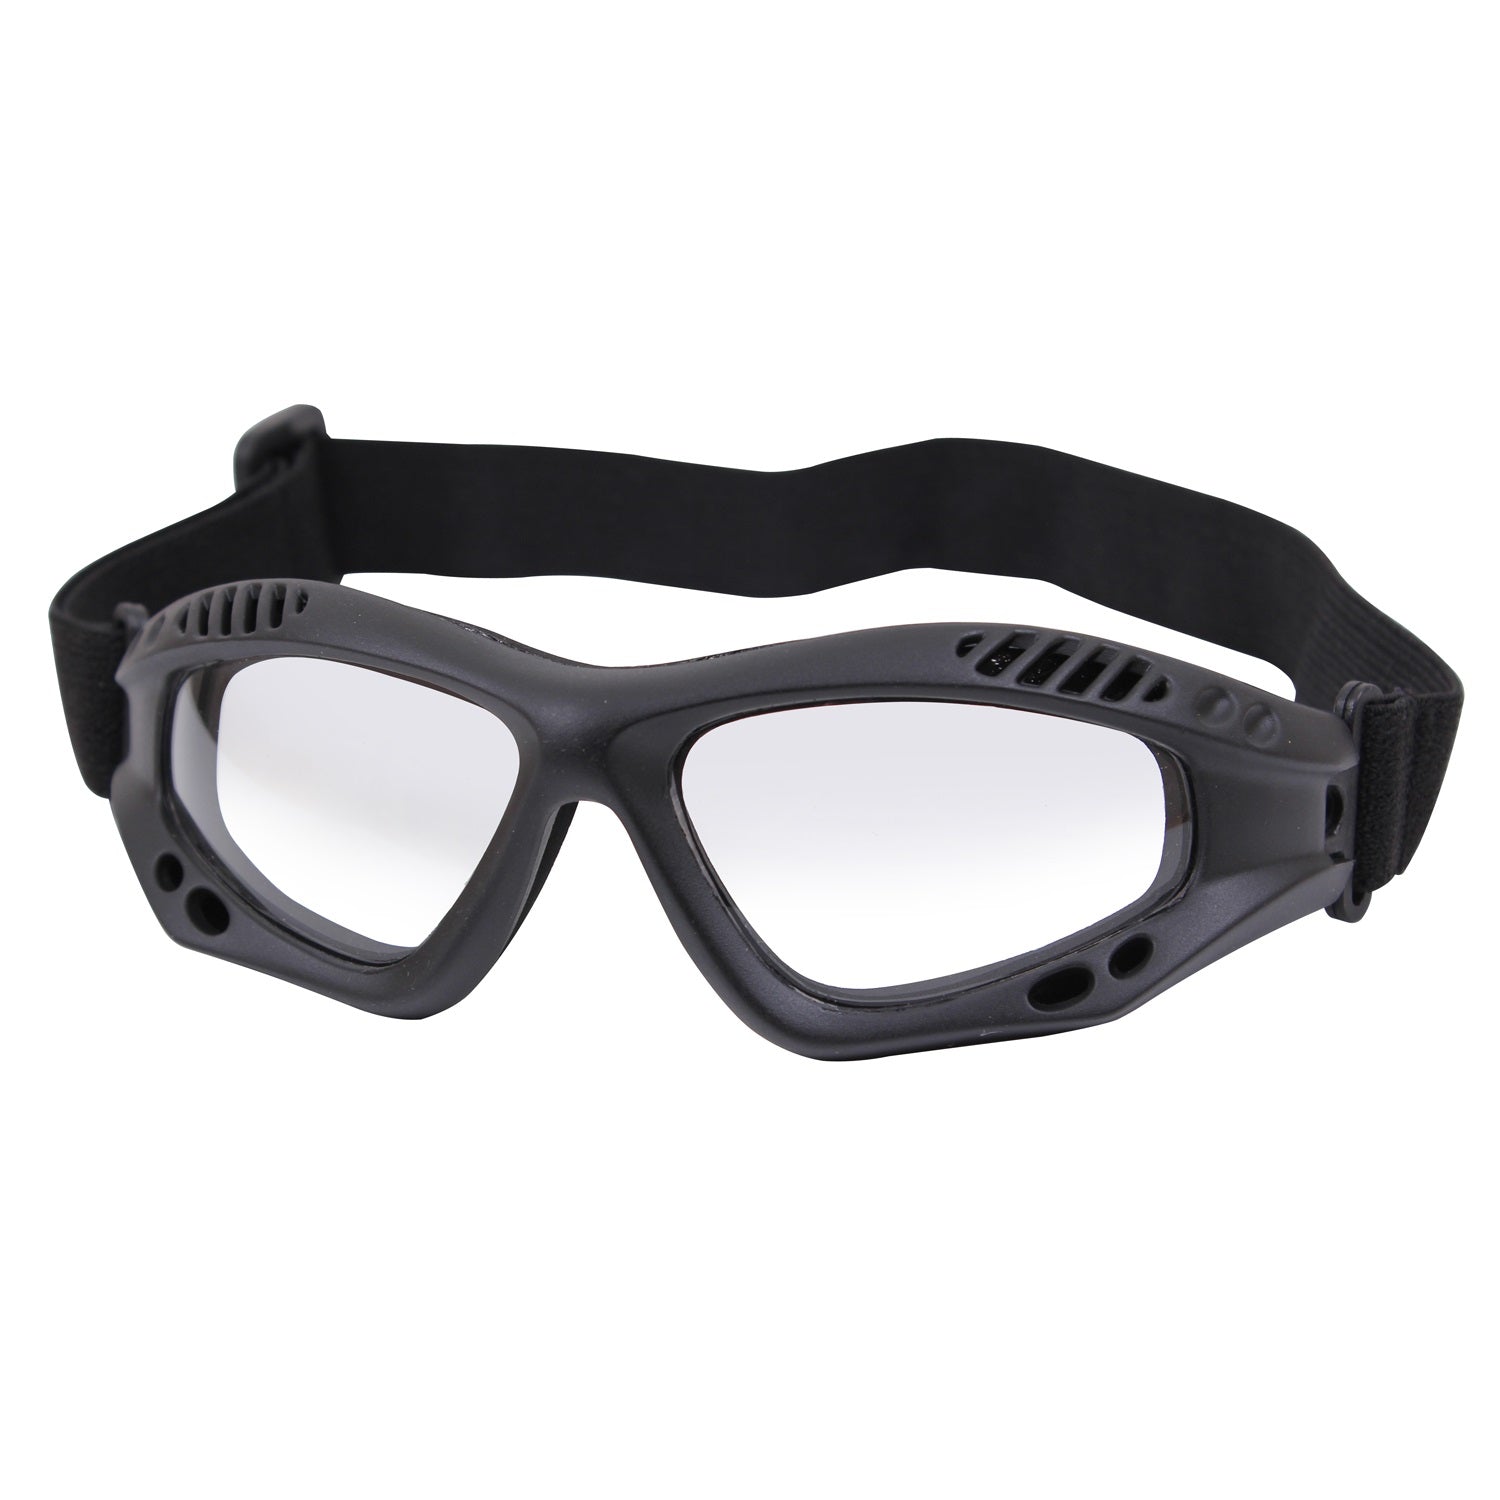 Rothco ANSI Rated Tactical Goggles Black and Clear